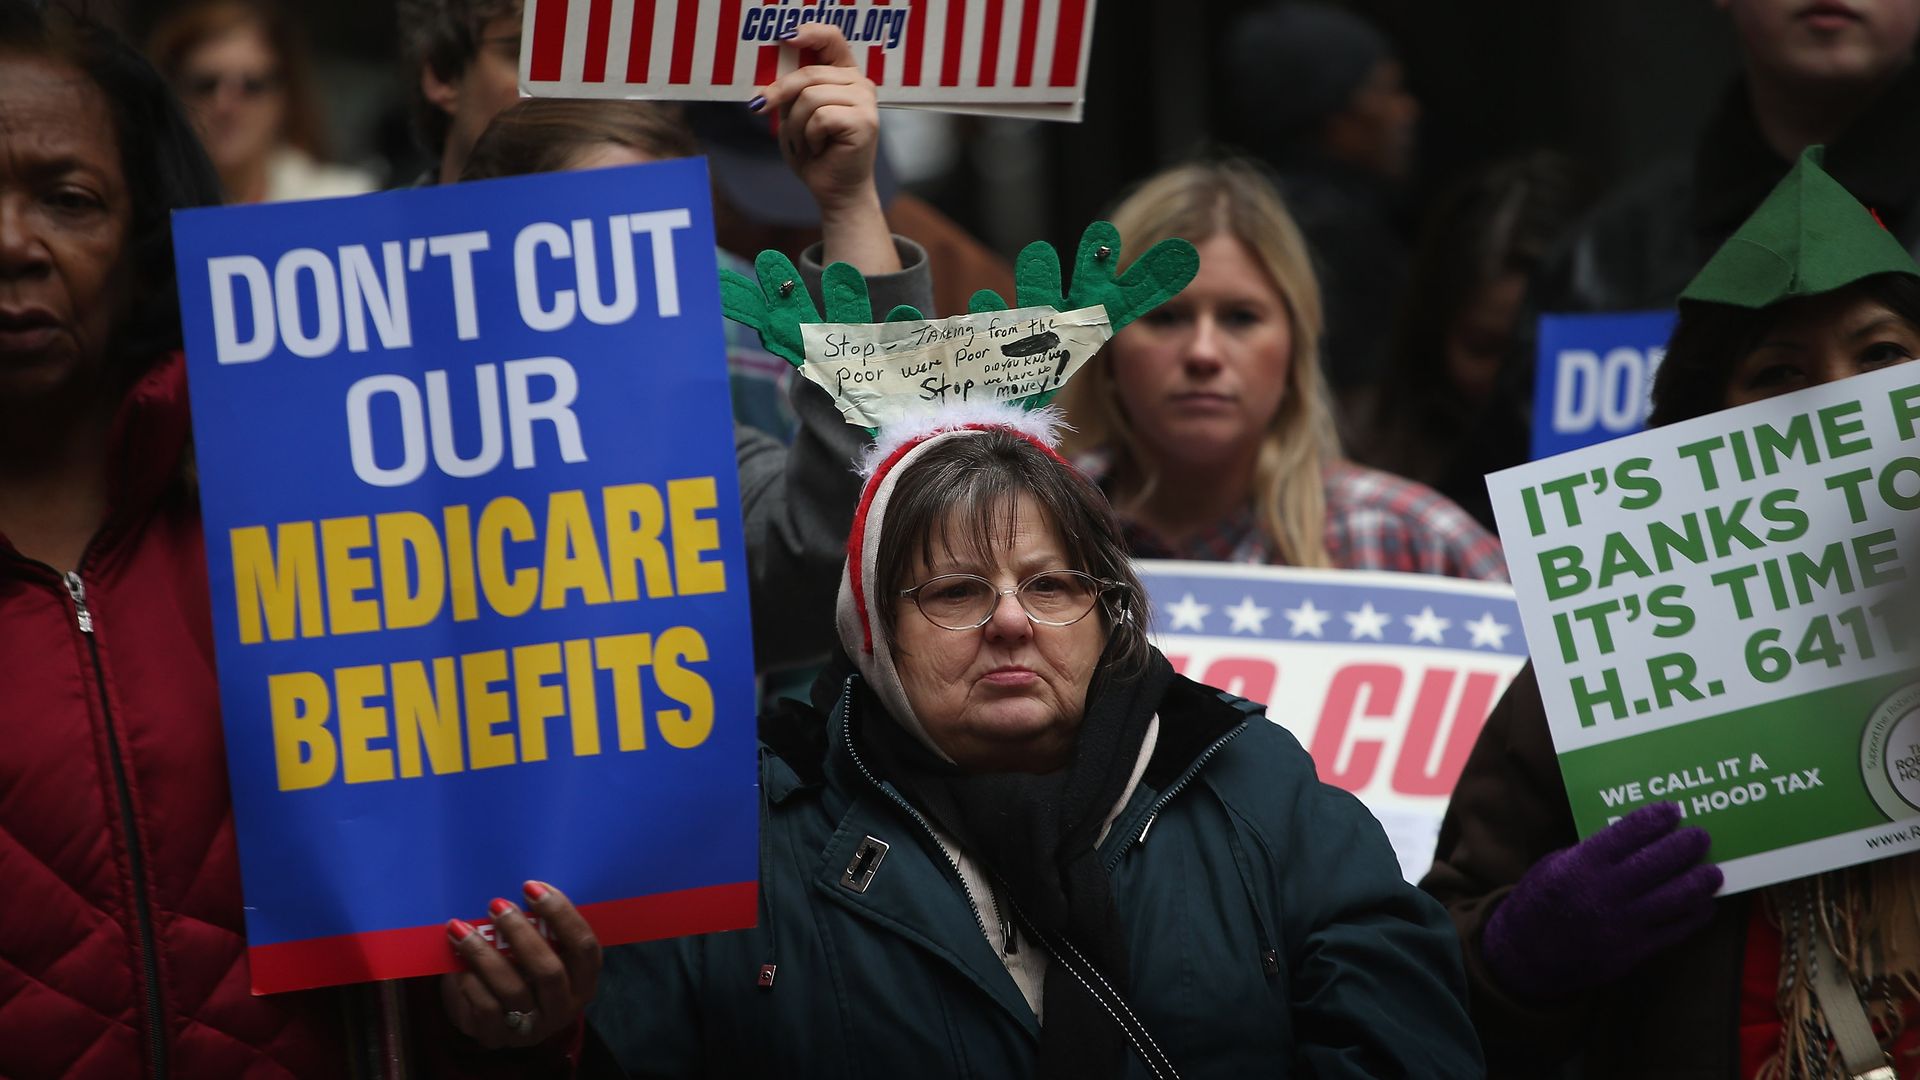 Protests of Medicare cuts occurred in Chicago.